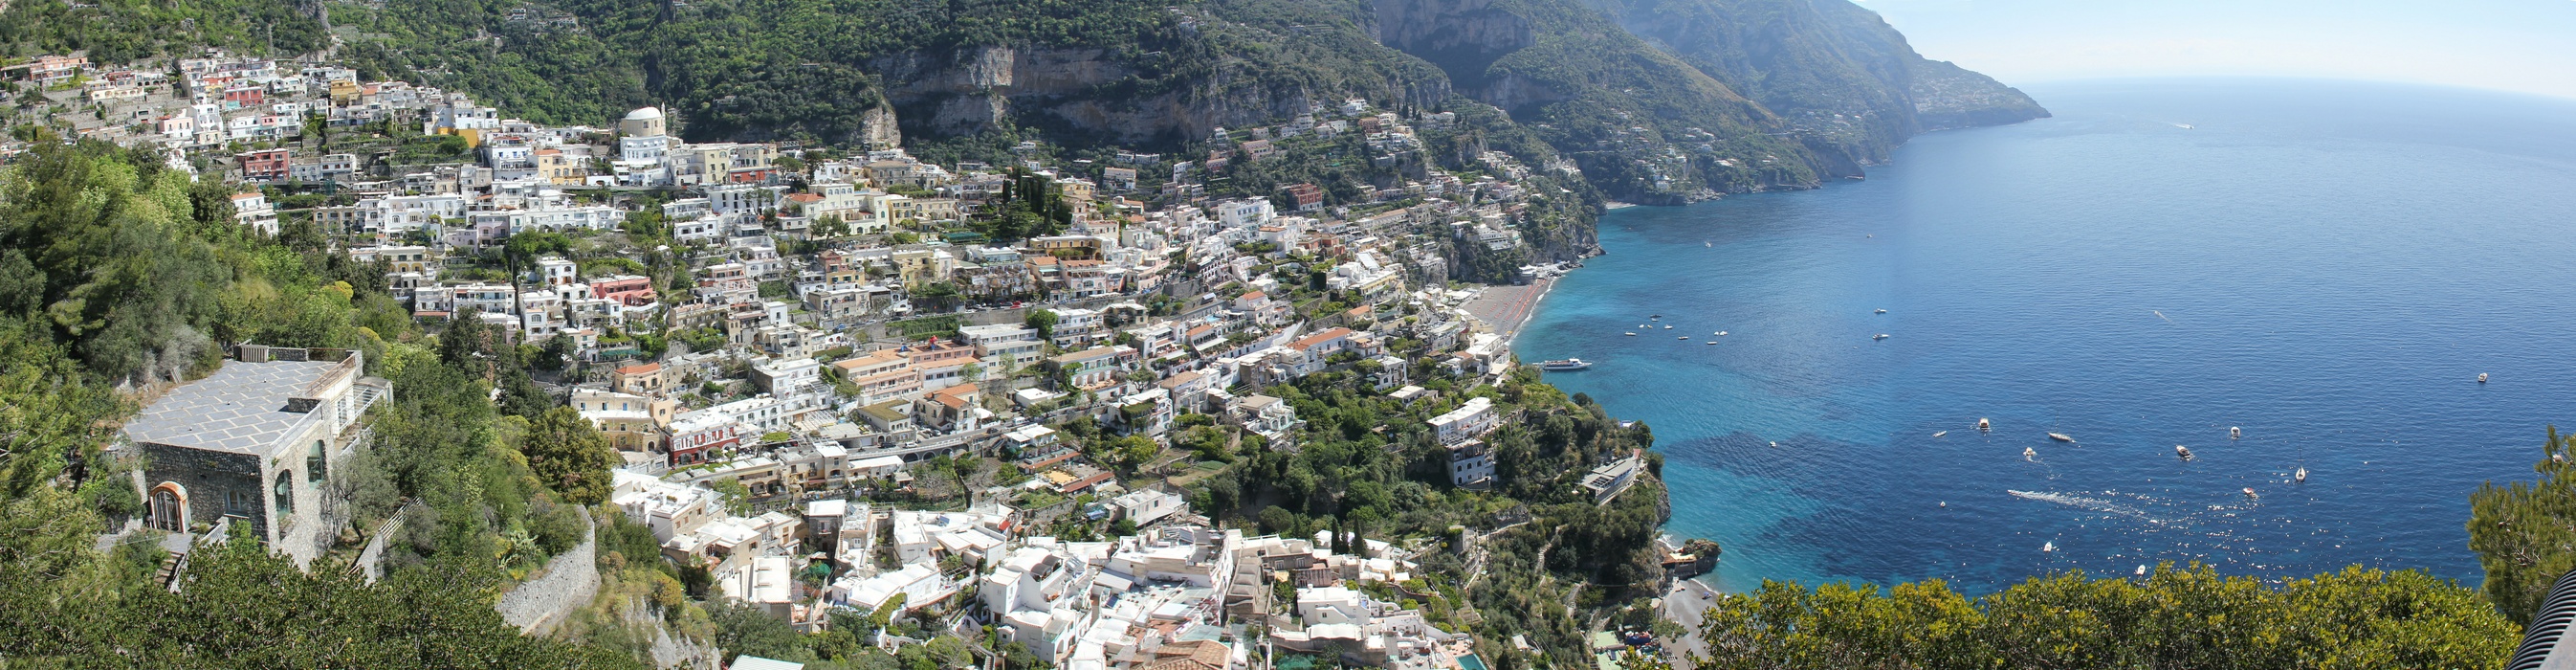 Panoramic nearly 180 deg view of the beautiful town of Positano spilling down the mountainside down to the sea.